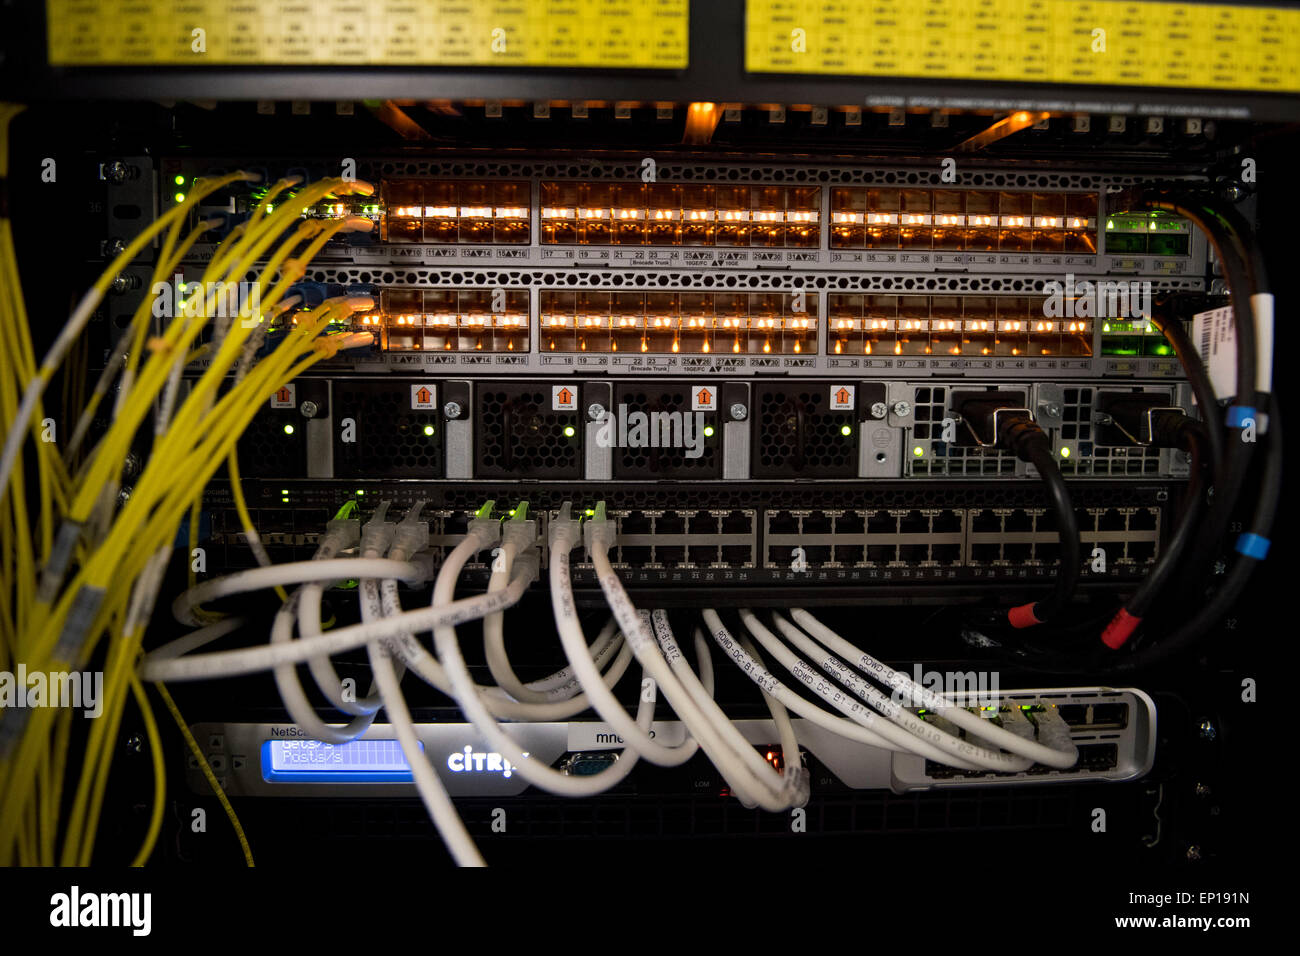 The rear of a computer server used for cloud computing showing routers and network cables. Stock Photo